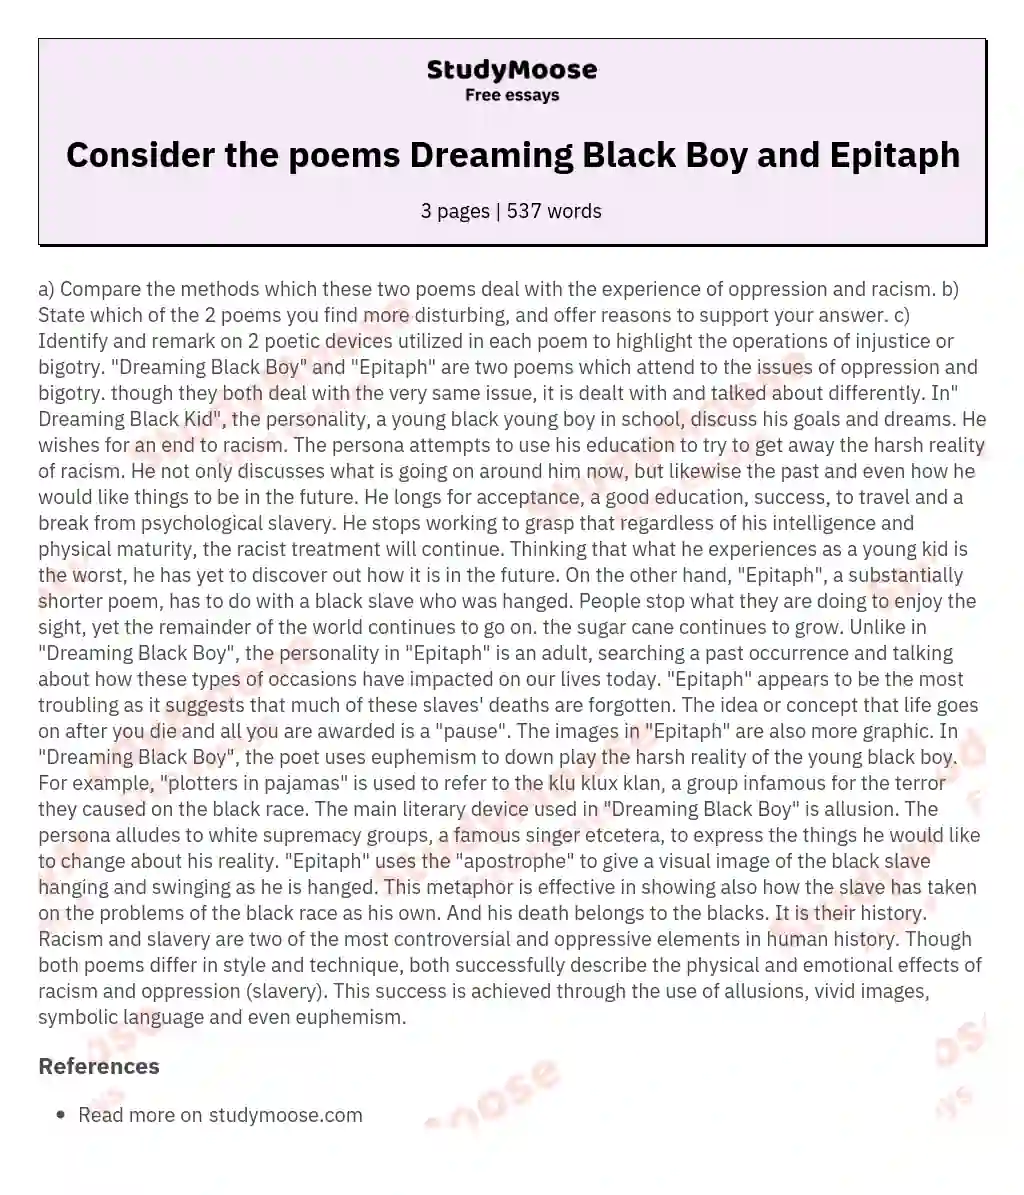 Consider the poems Dreaming Black Boy and Epitaph essay